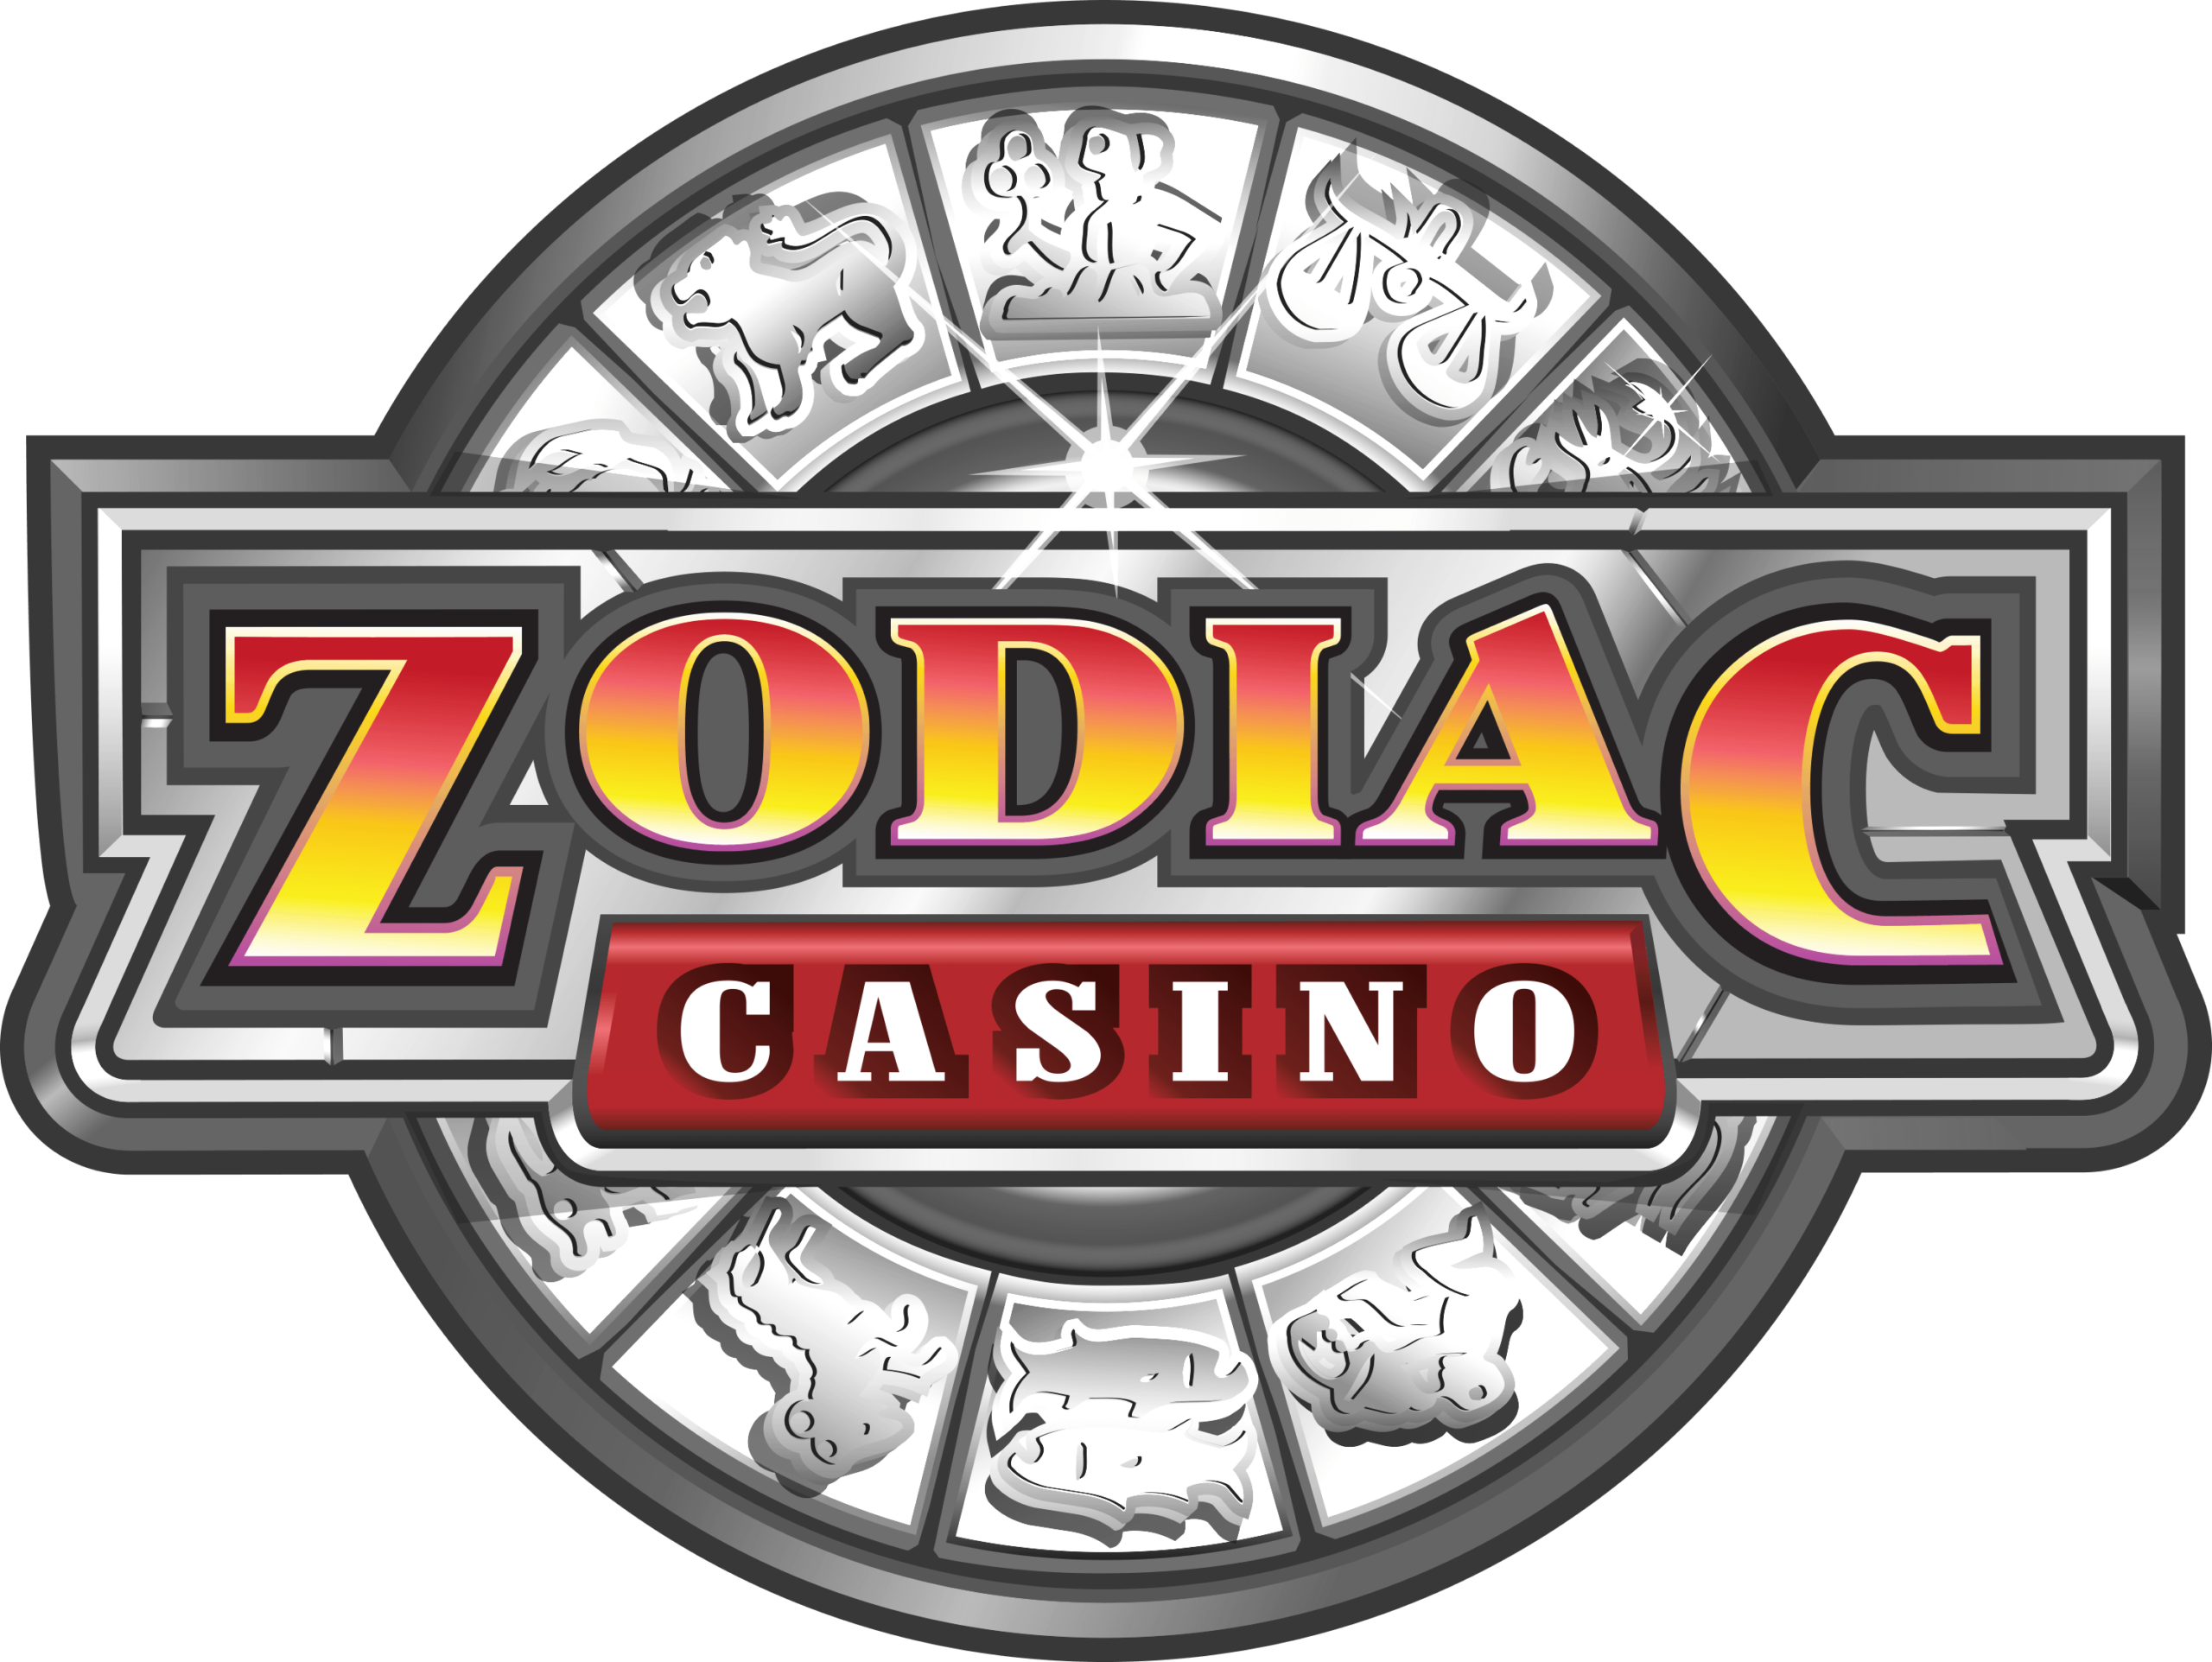 Zodiac Casino voucher codes for canadian players